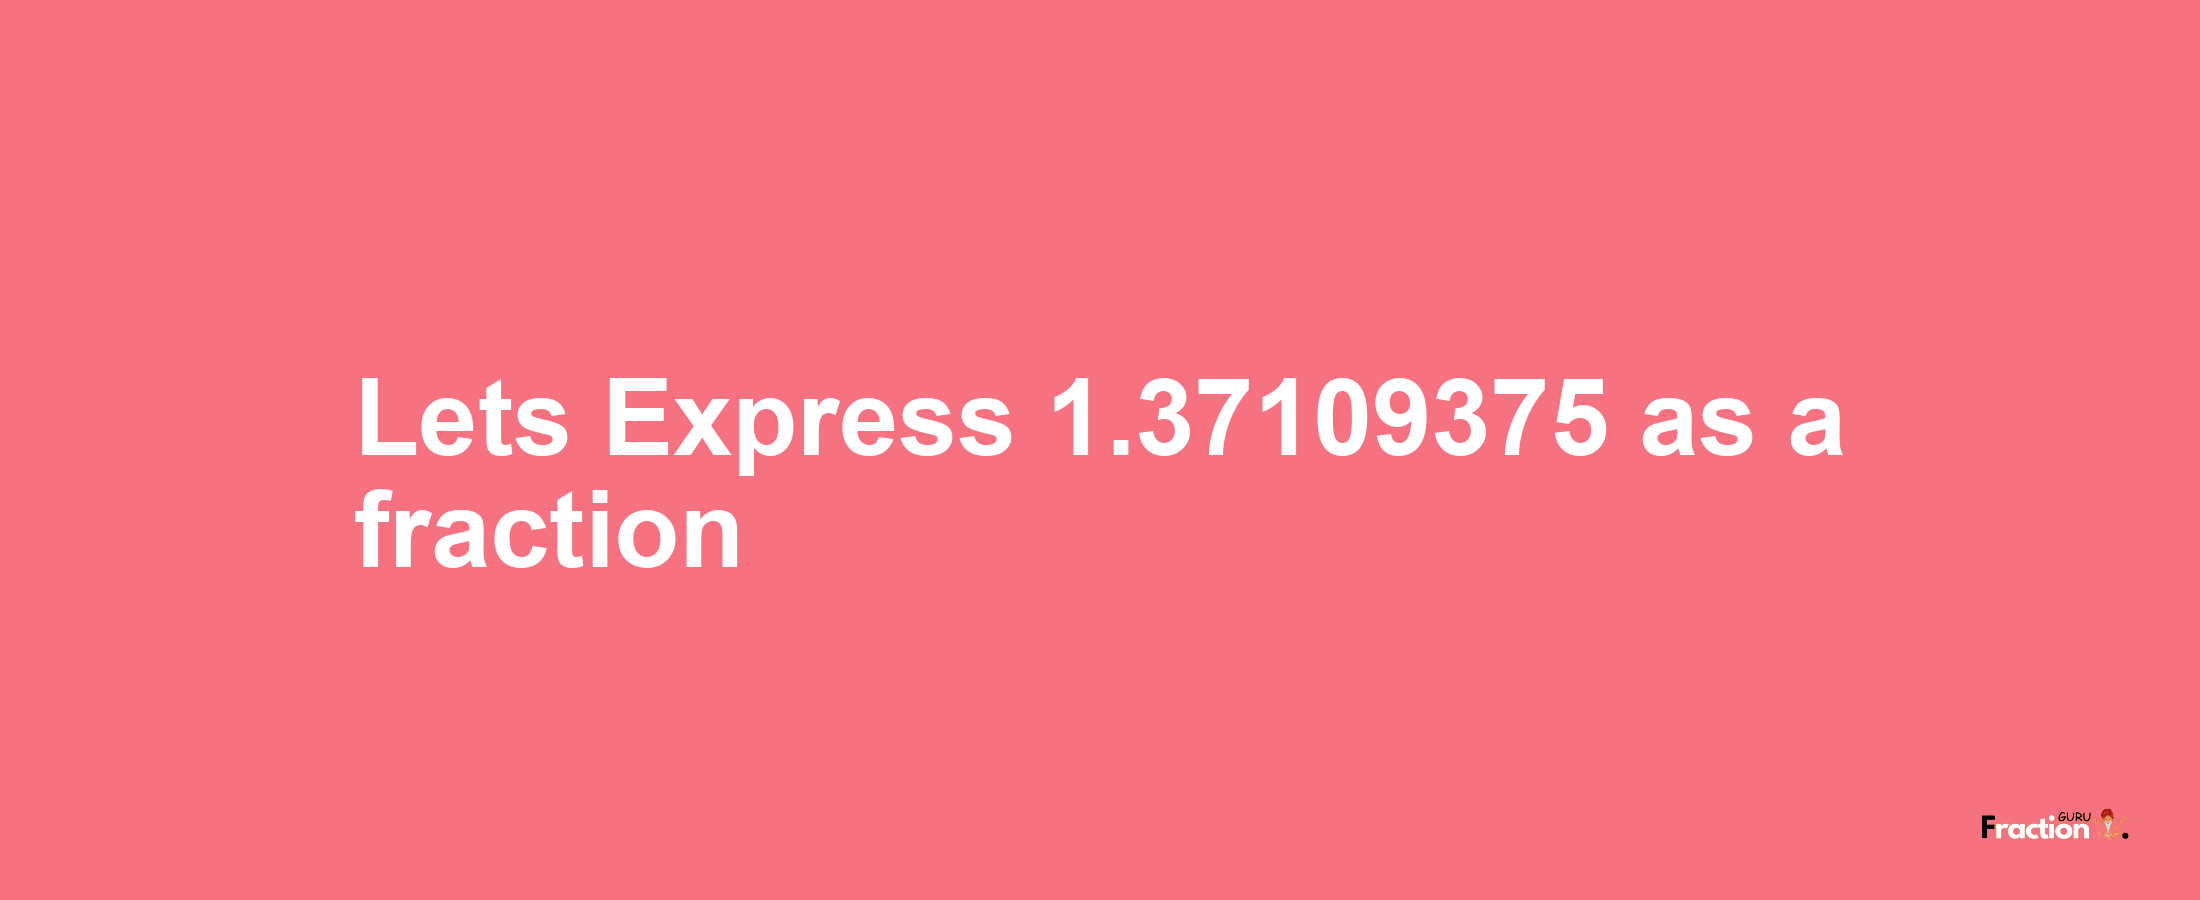 Lets Express 1.37109375 as afraction